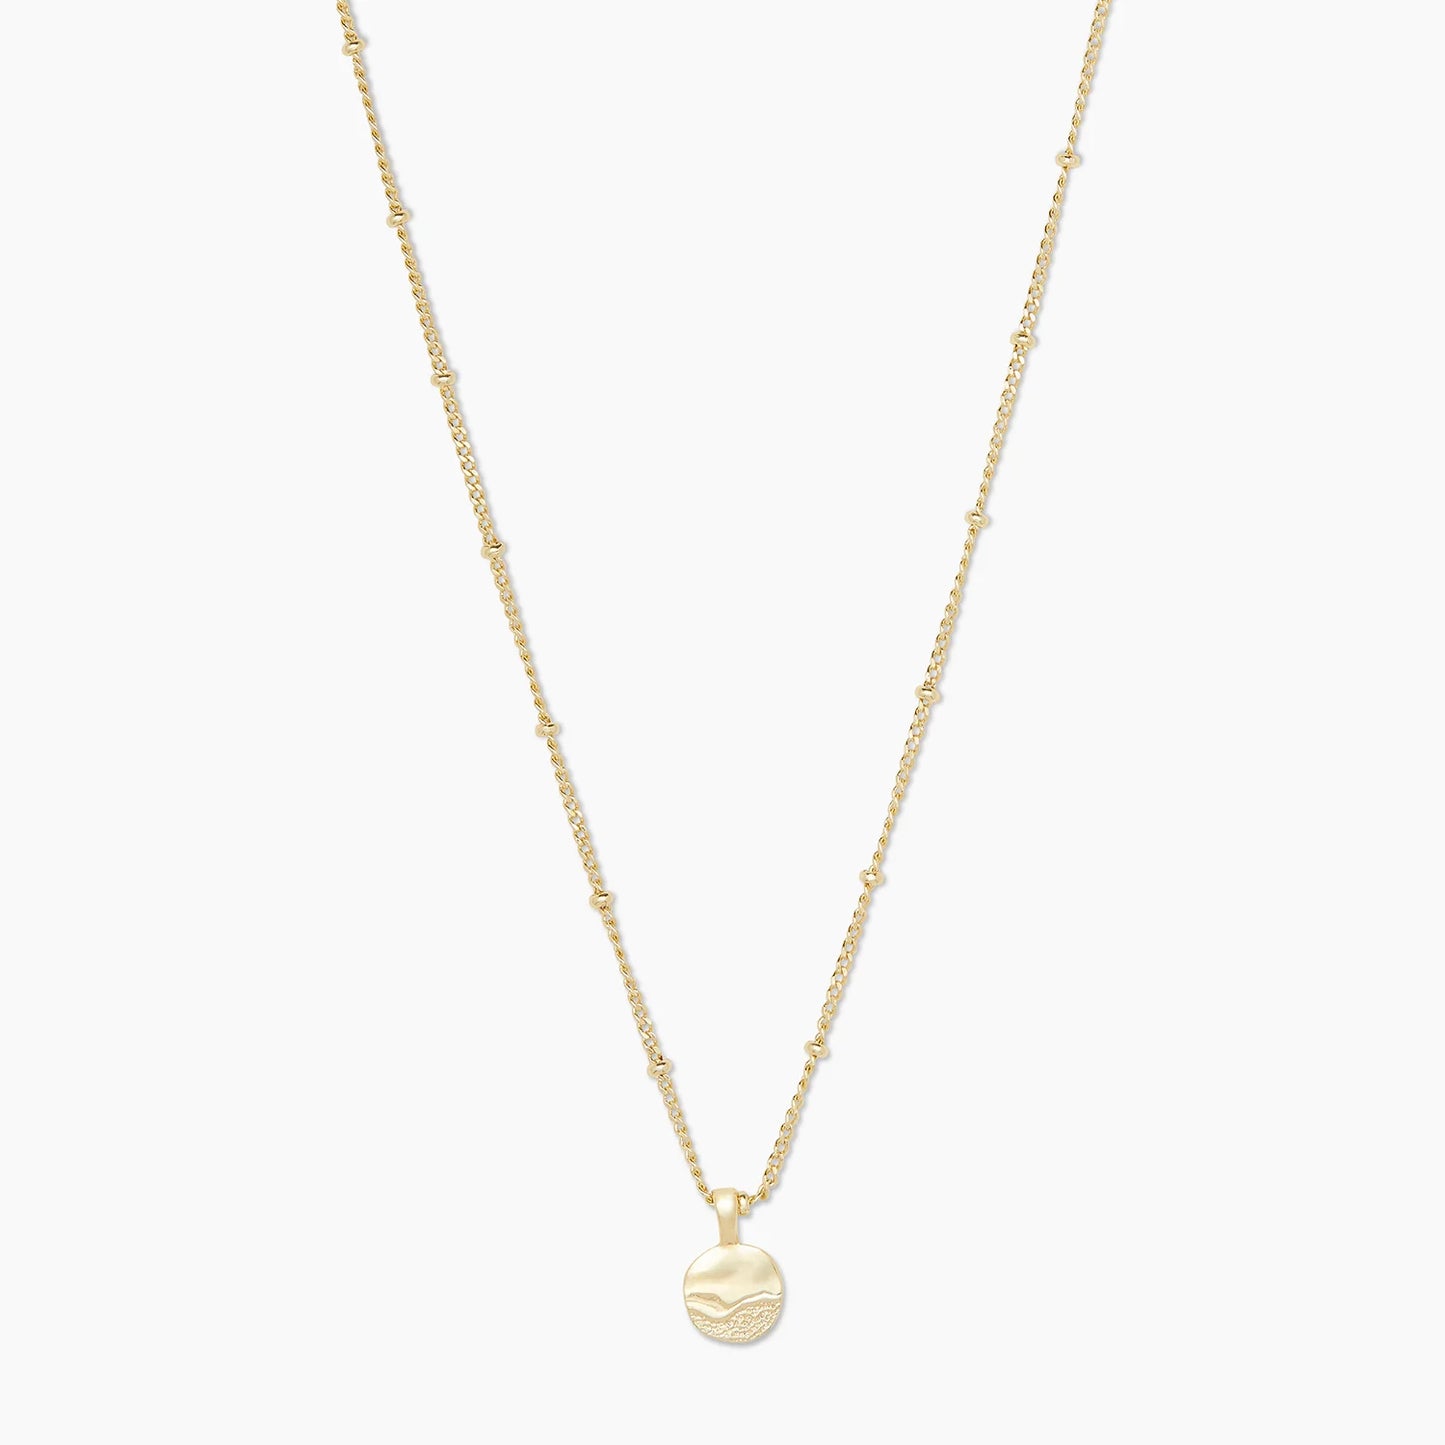 Beach days never have to end with the Shorebreak Necklace. Crafted with 18k gold plated brass, this delicate chain features evenly spaced tiny balls and an etched pendant reminiscent of a sandy shoreline.